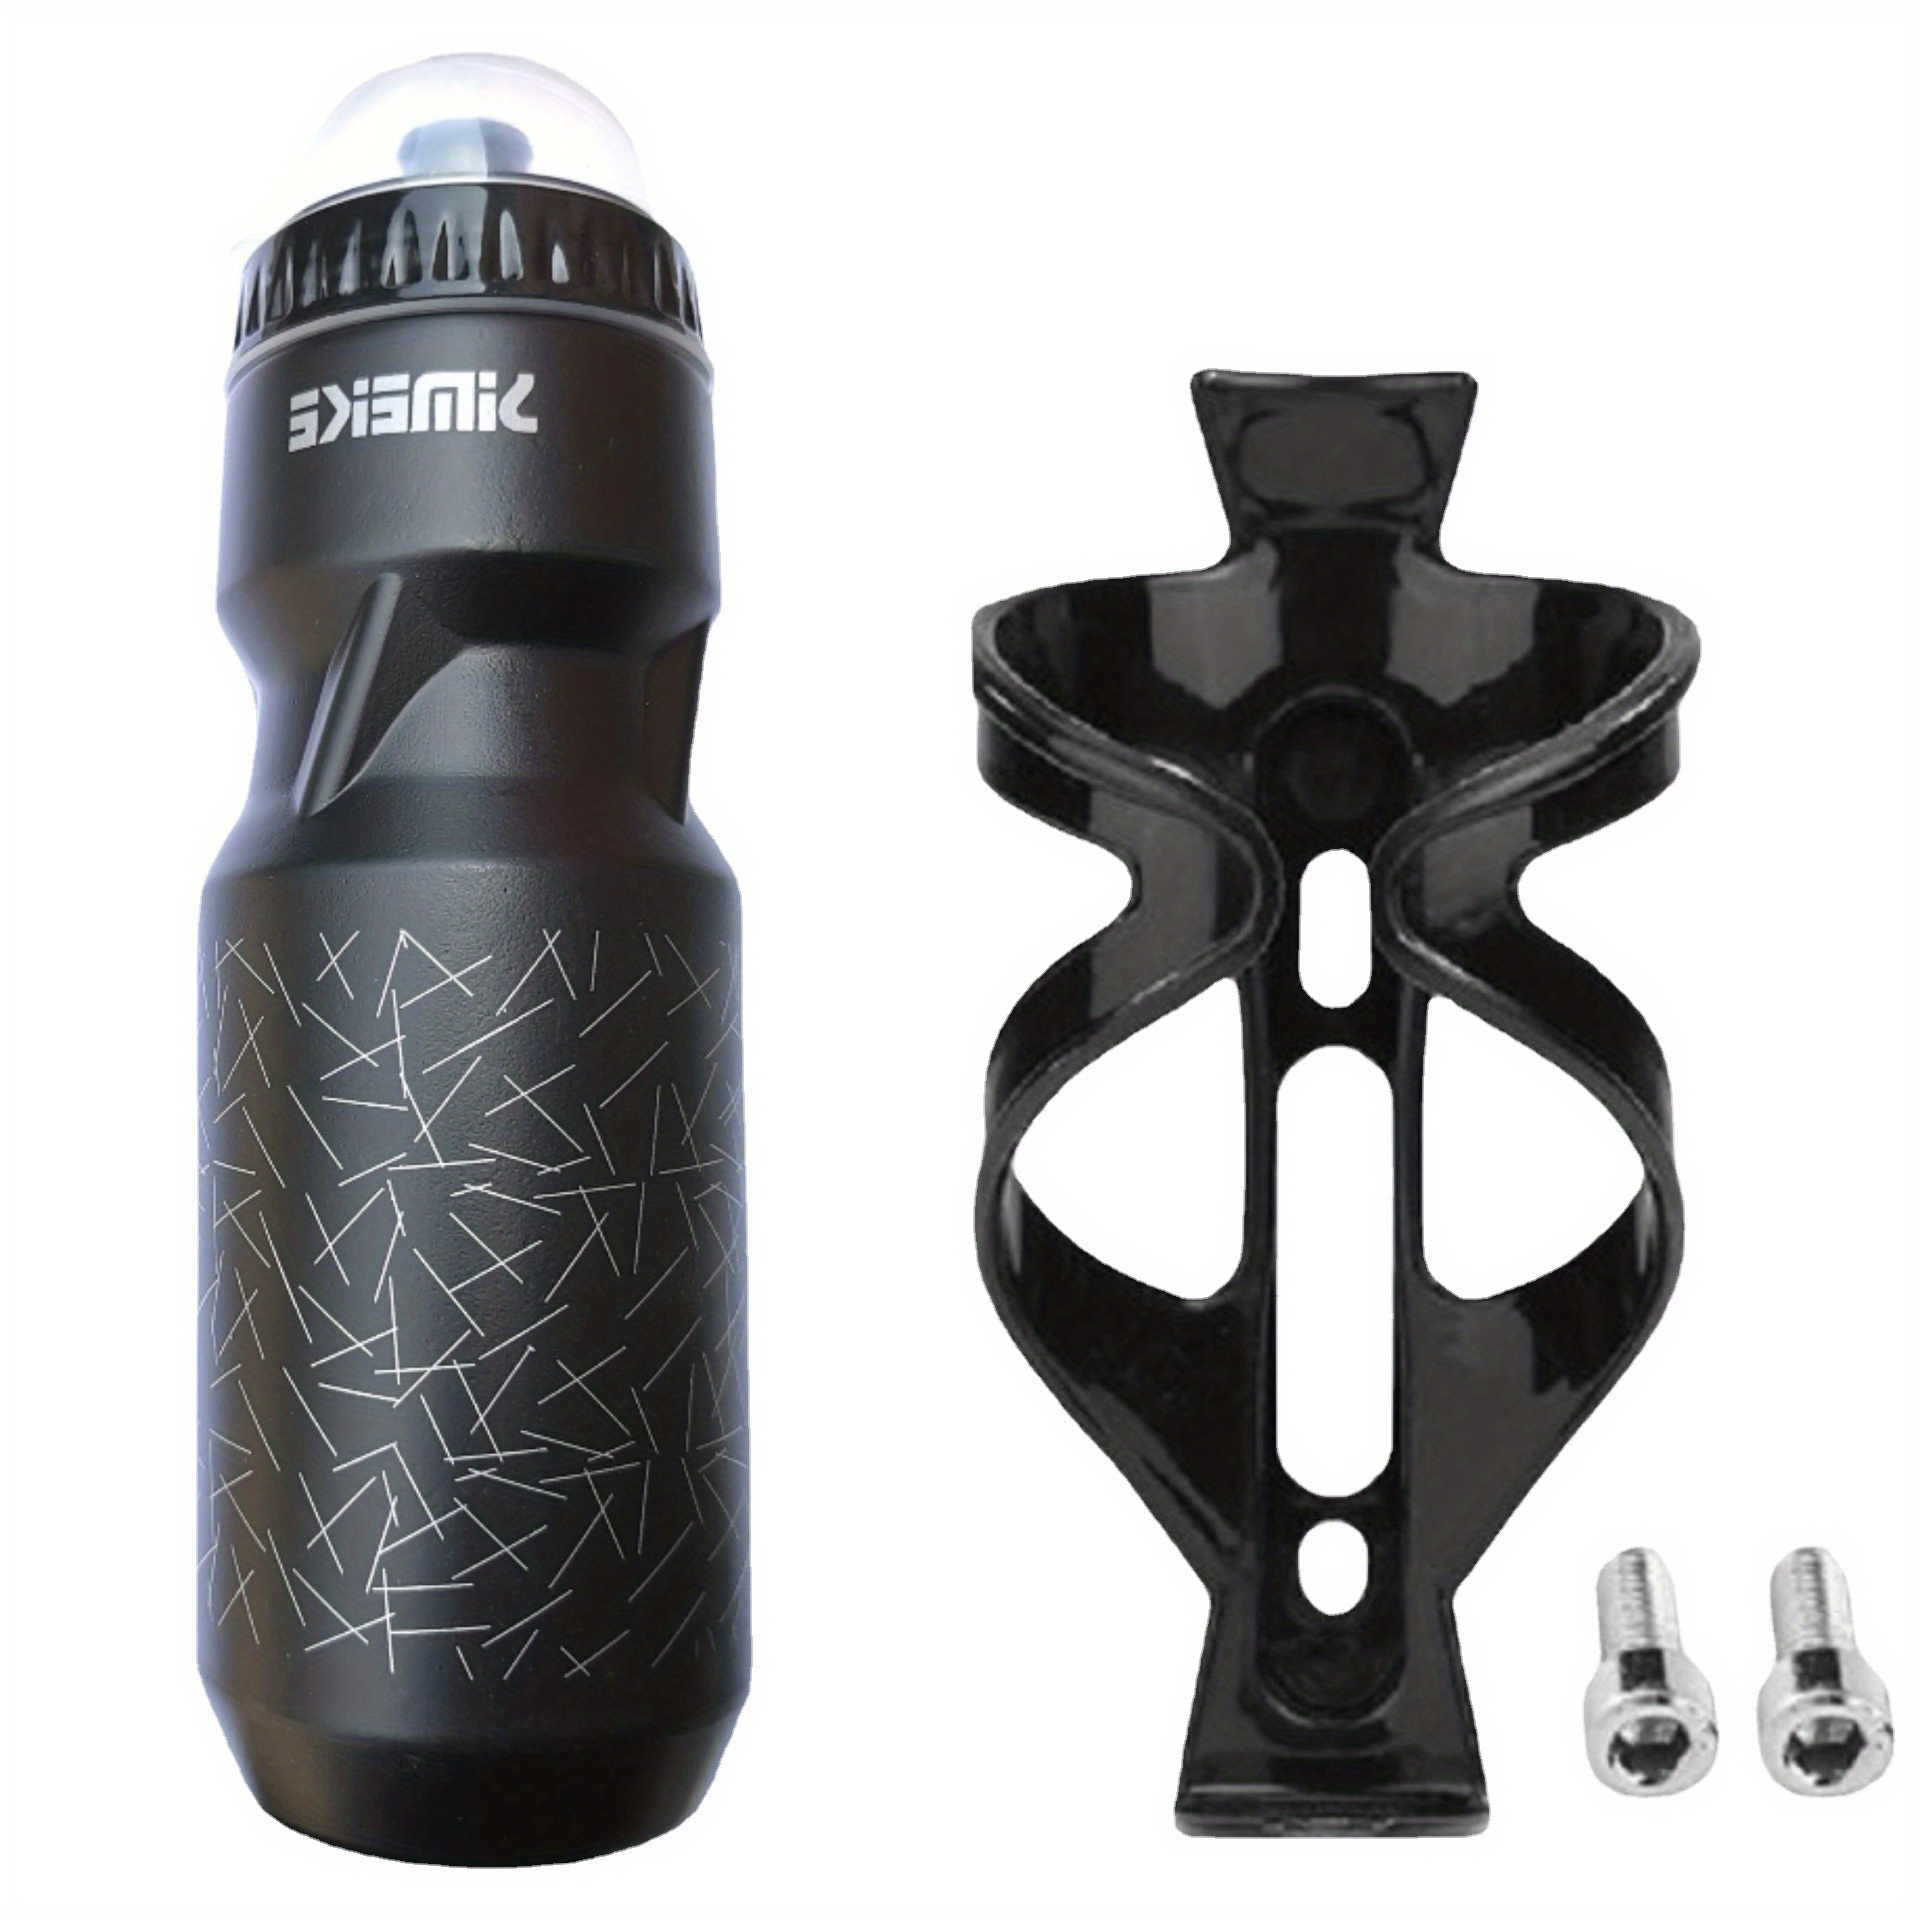 

Sports Water Bottle For Mountain Biking, With Cage Holder And Screws, Outdoor Cycling Hydration Gear